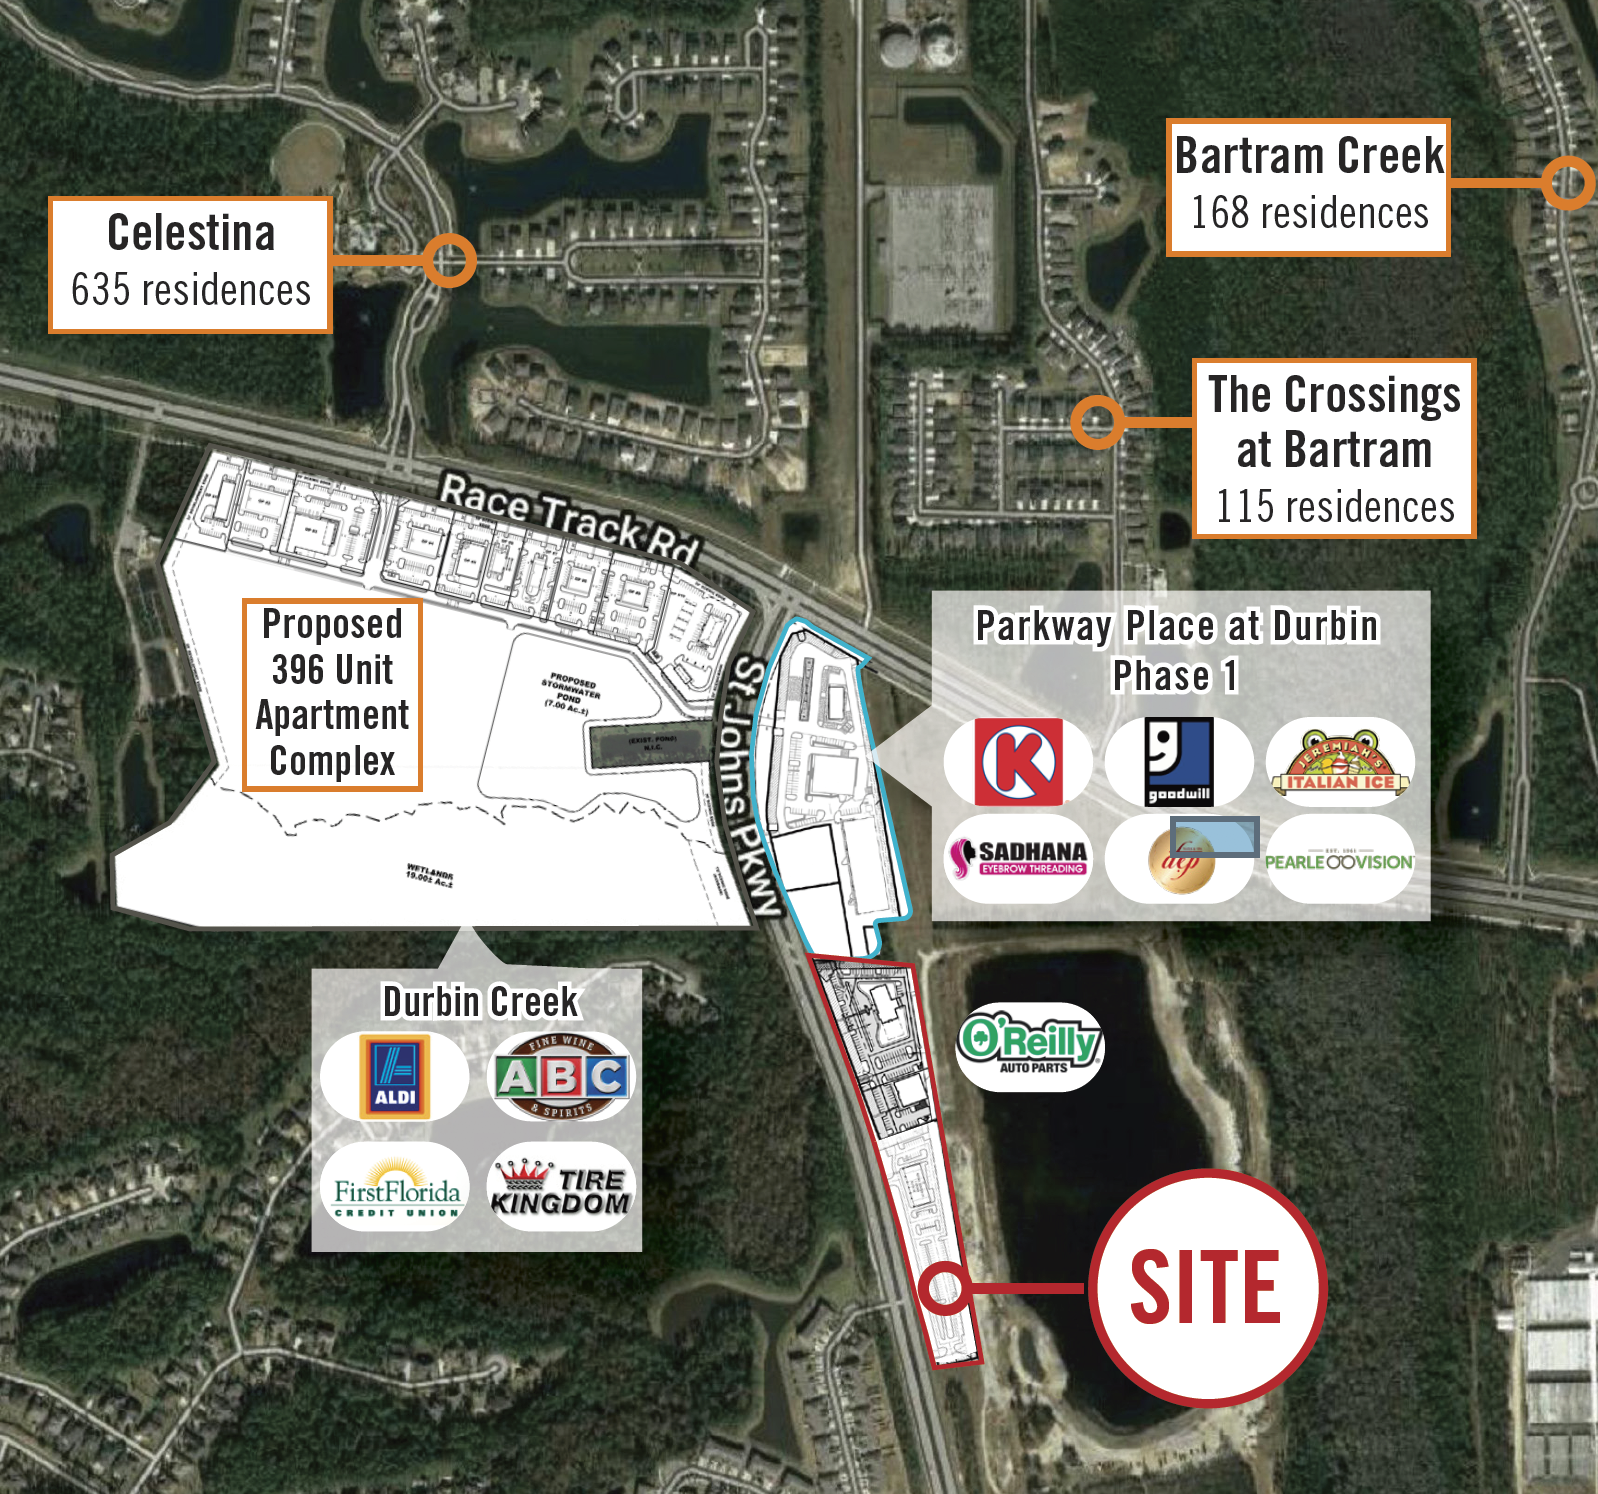 The site is at Race Track Road and St. Johns Parkway, off Interstate 95.